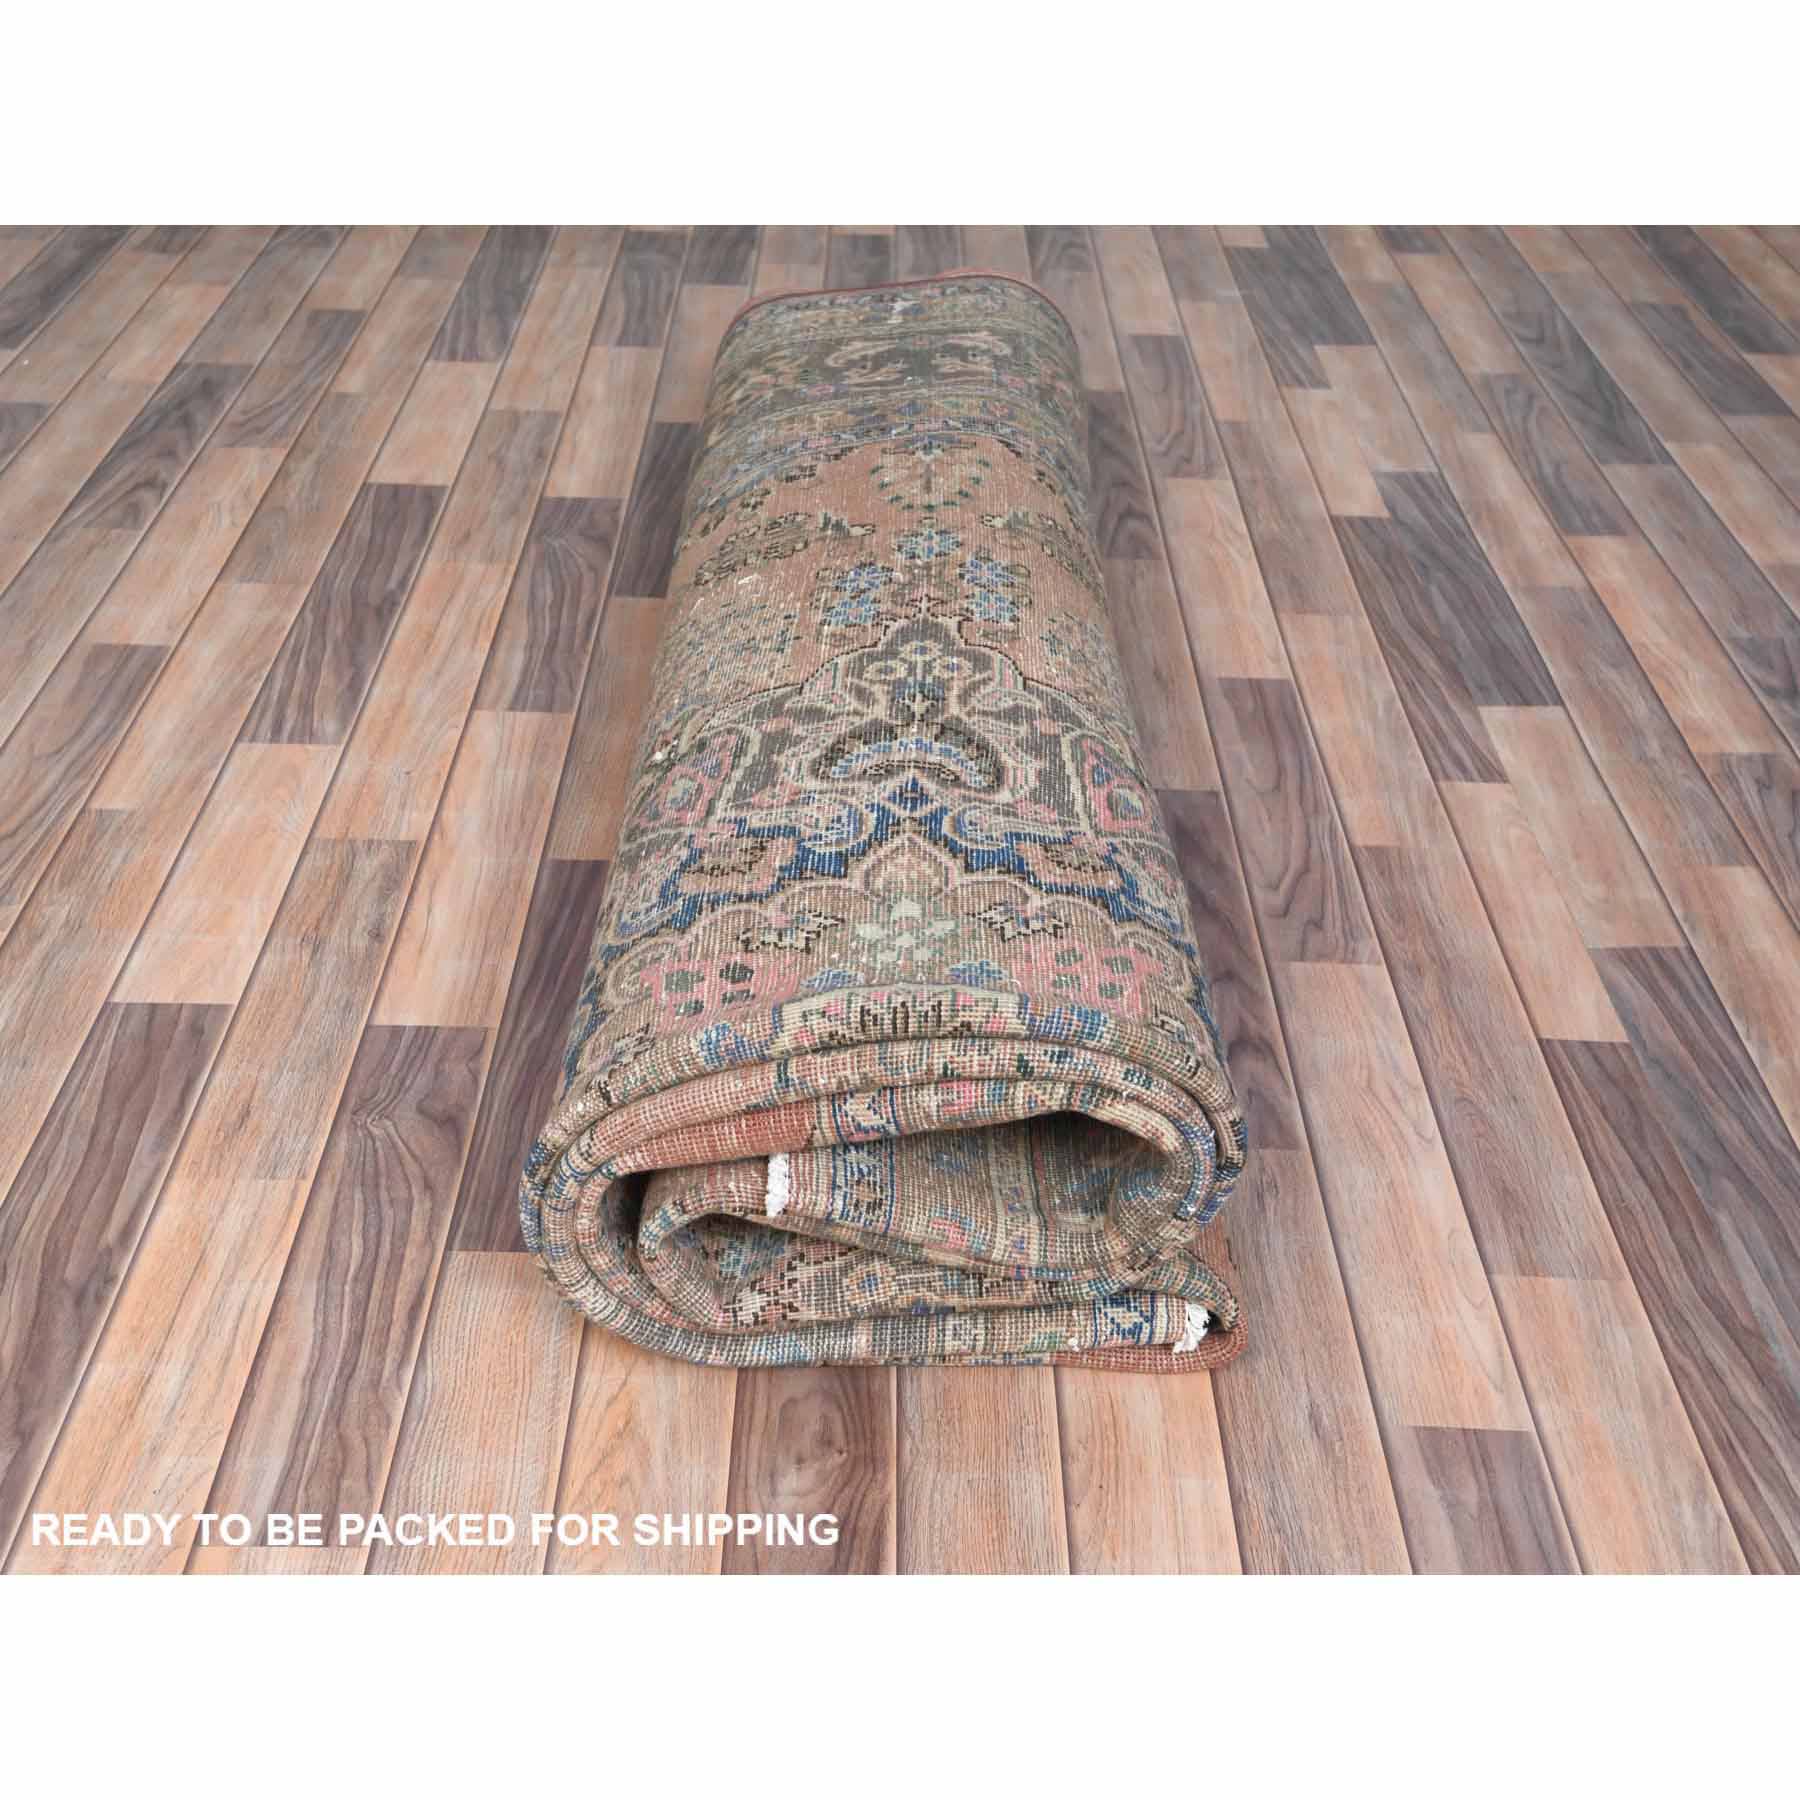 Overdyed-Vintage-Hand-Knotted-Rug-309865